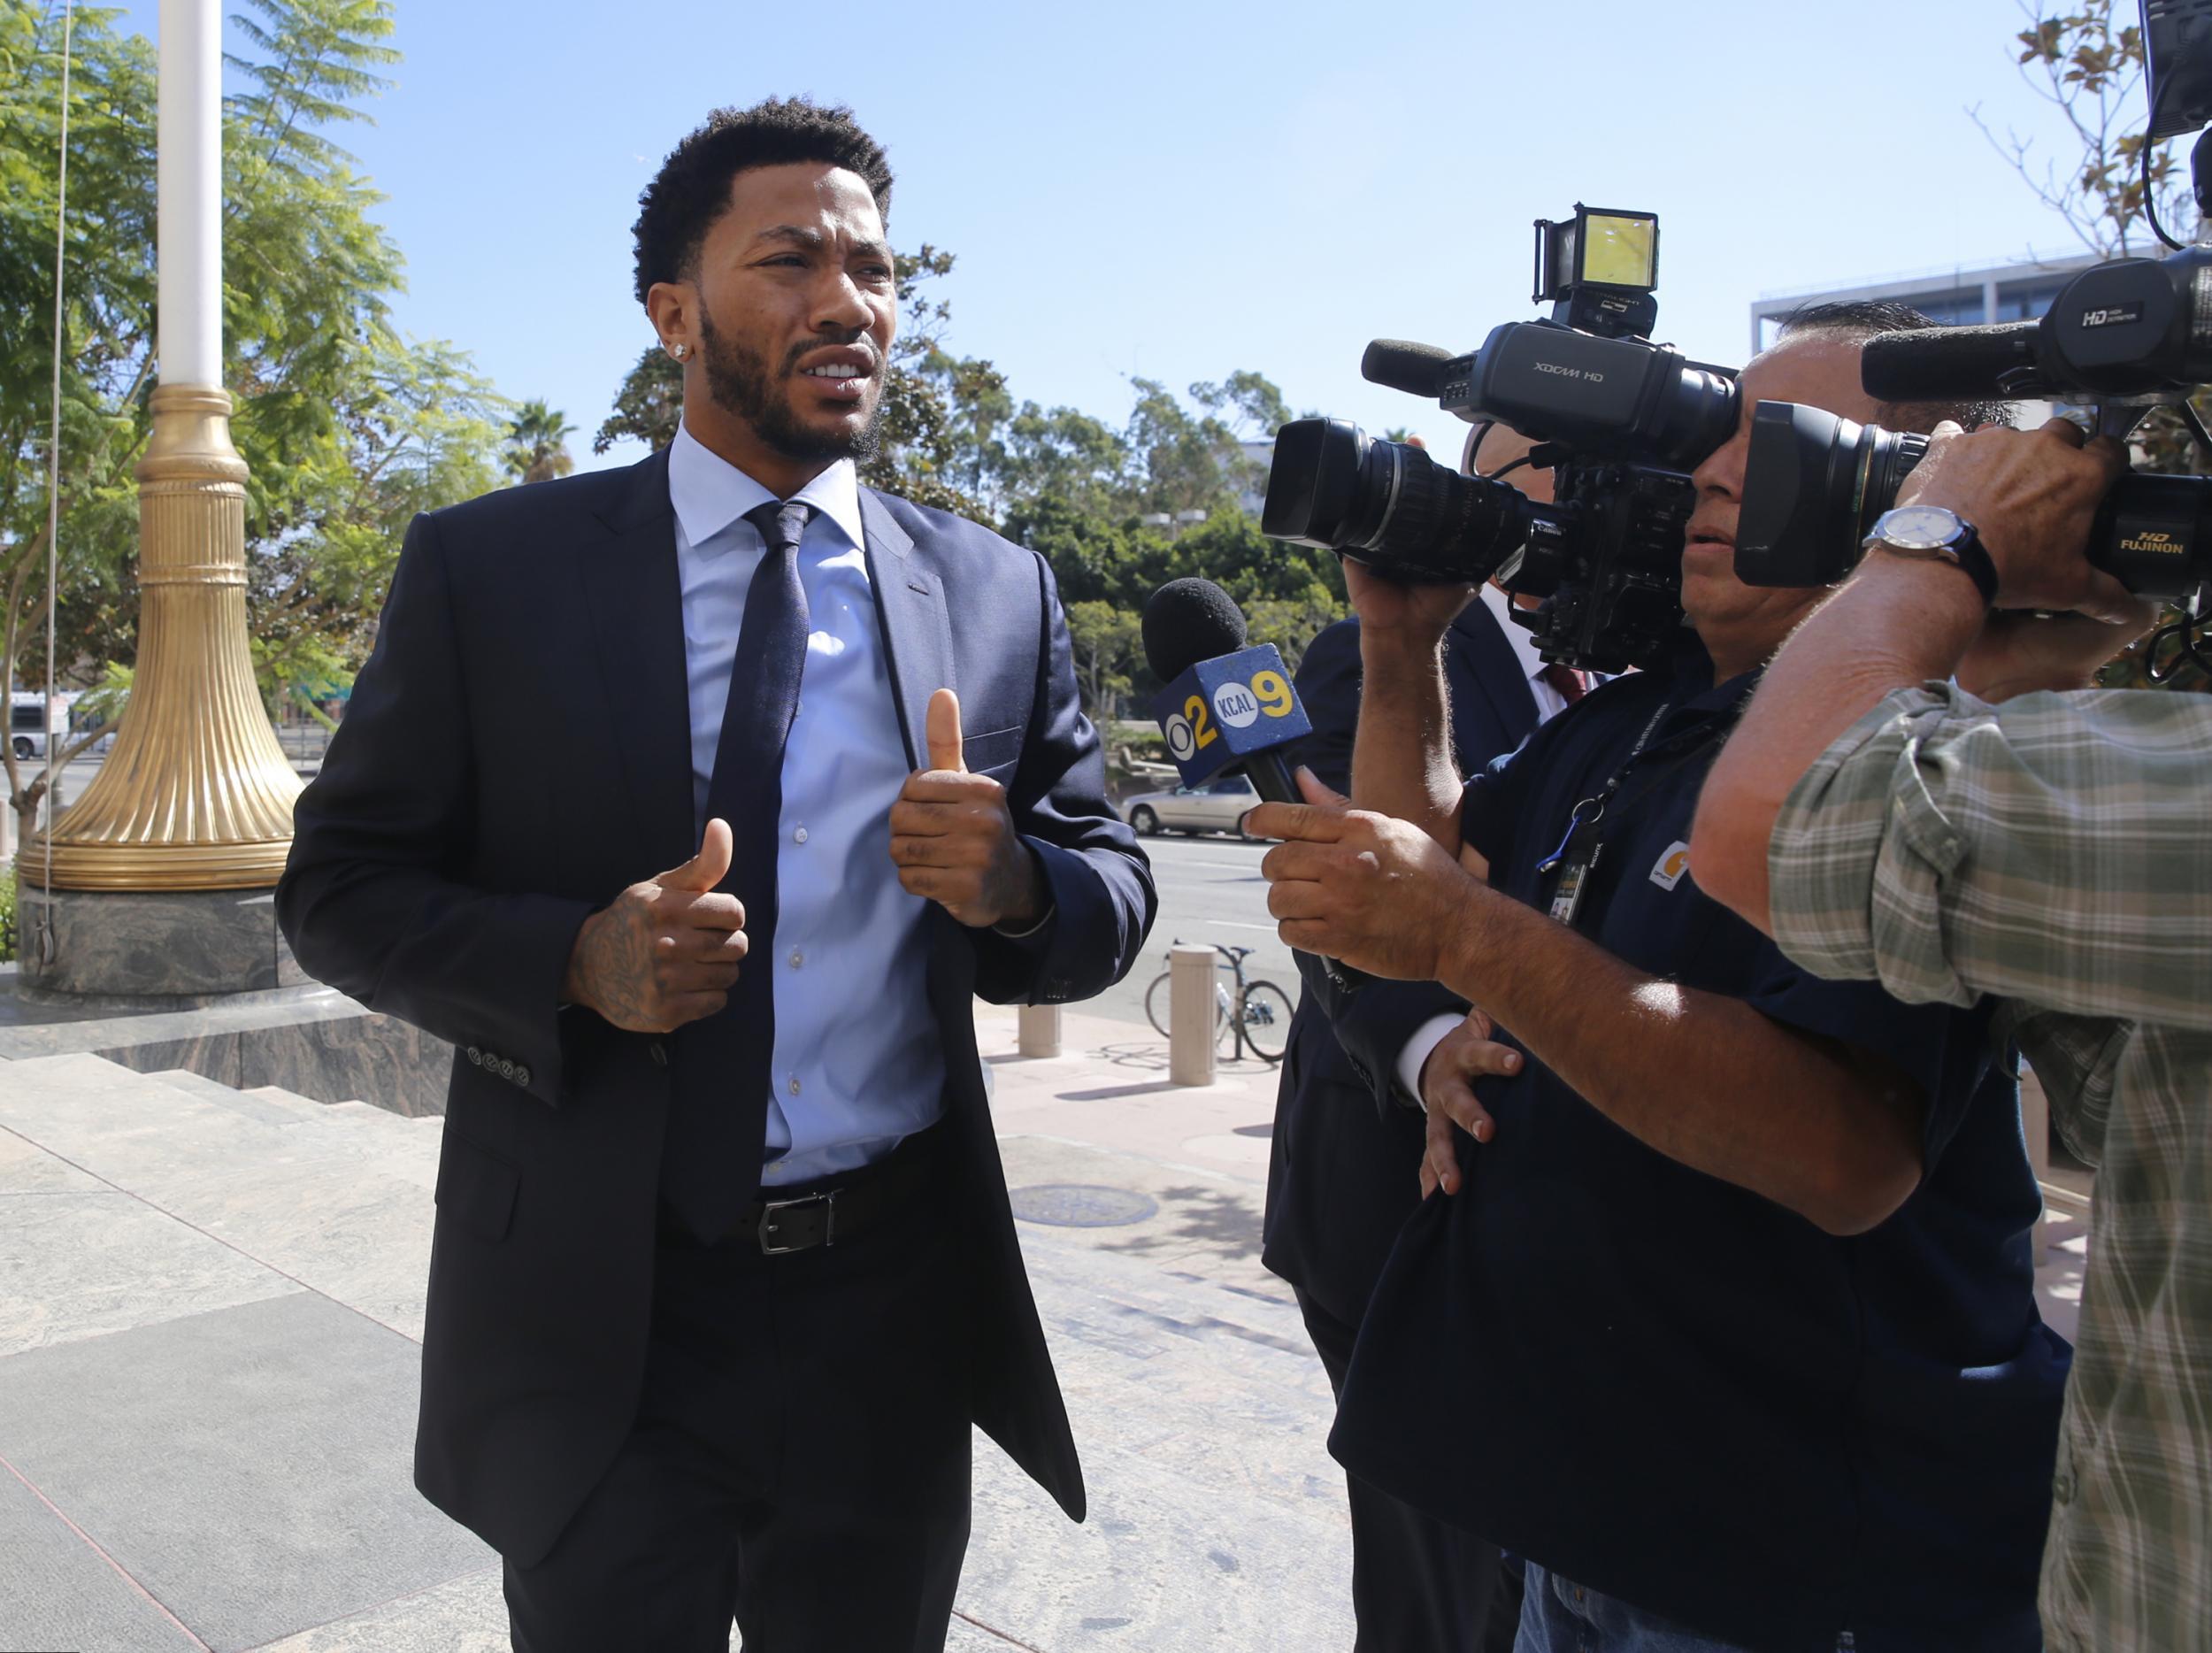 &#13;
New York Knicks player Derrick Rose arrives at U.S. District Court in downtown Los Angeles. &#13;